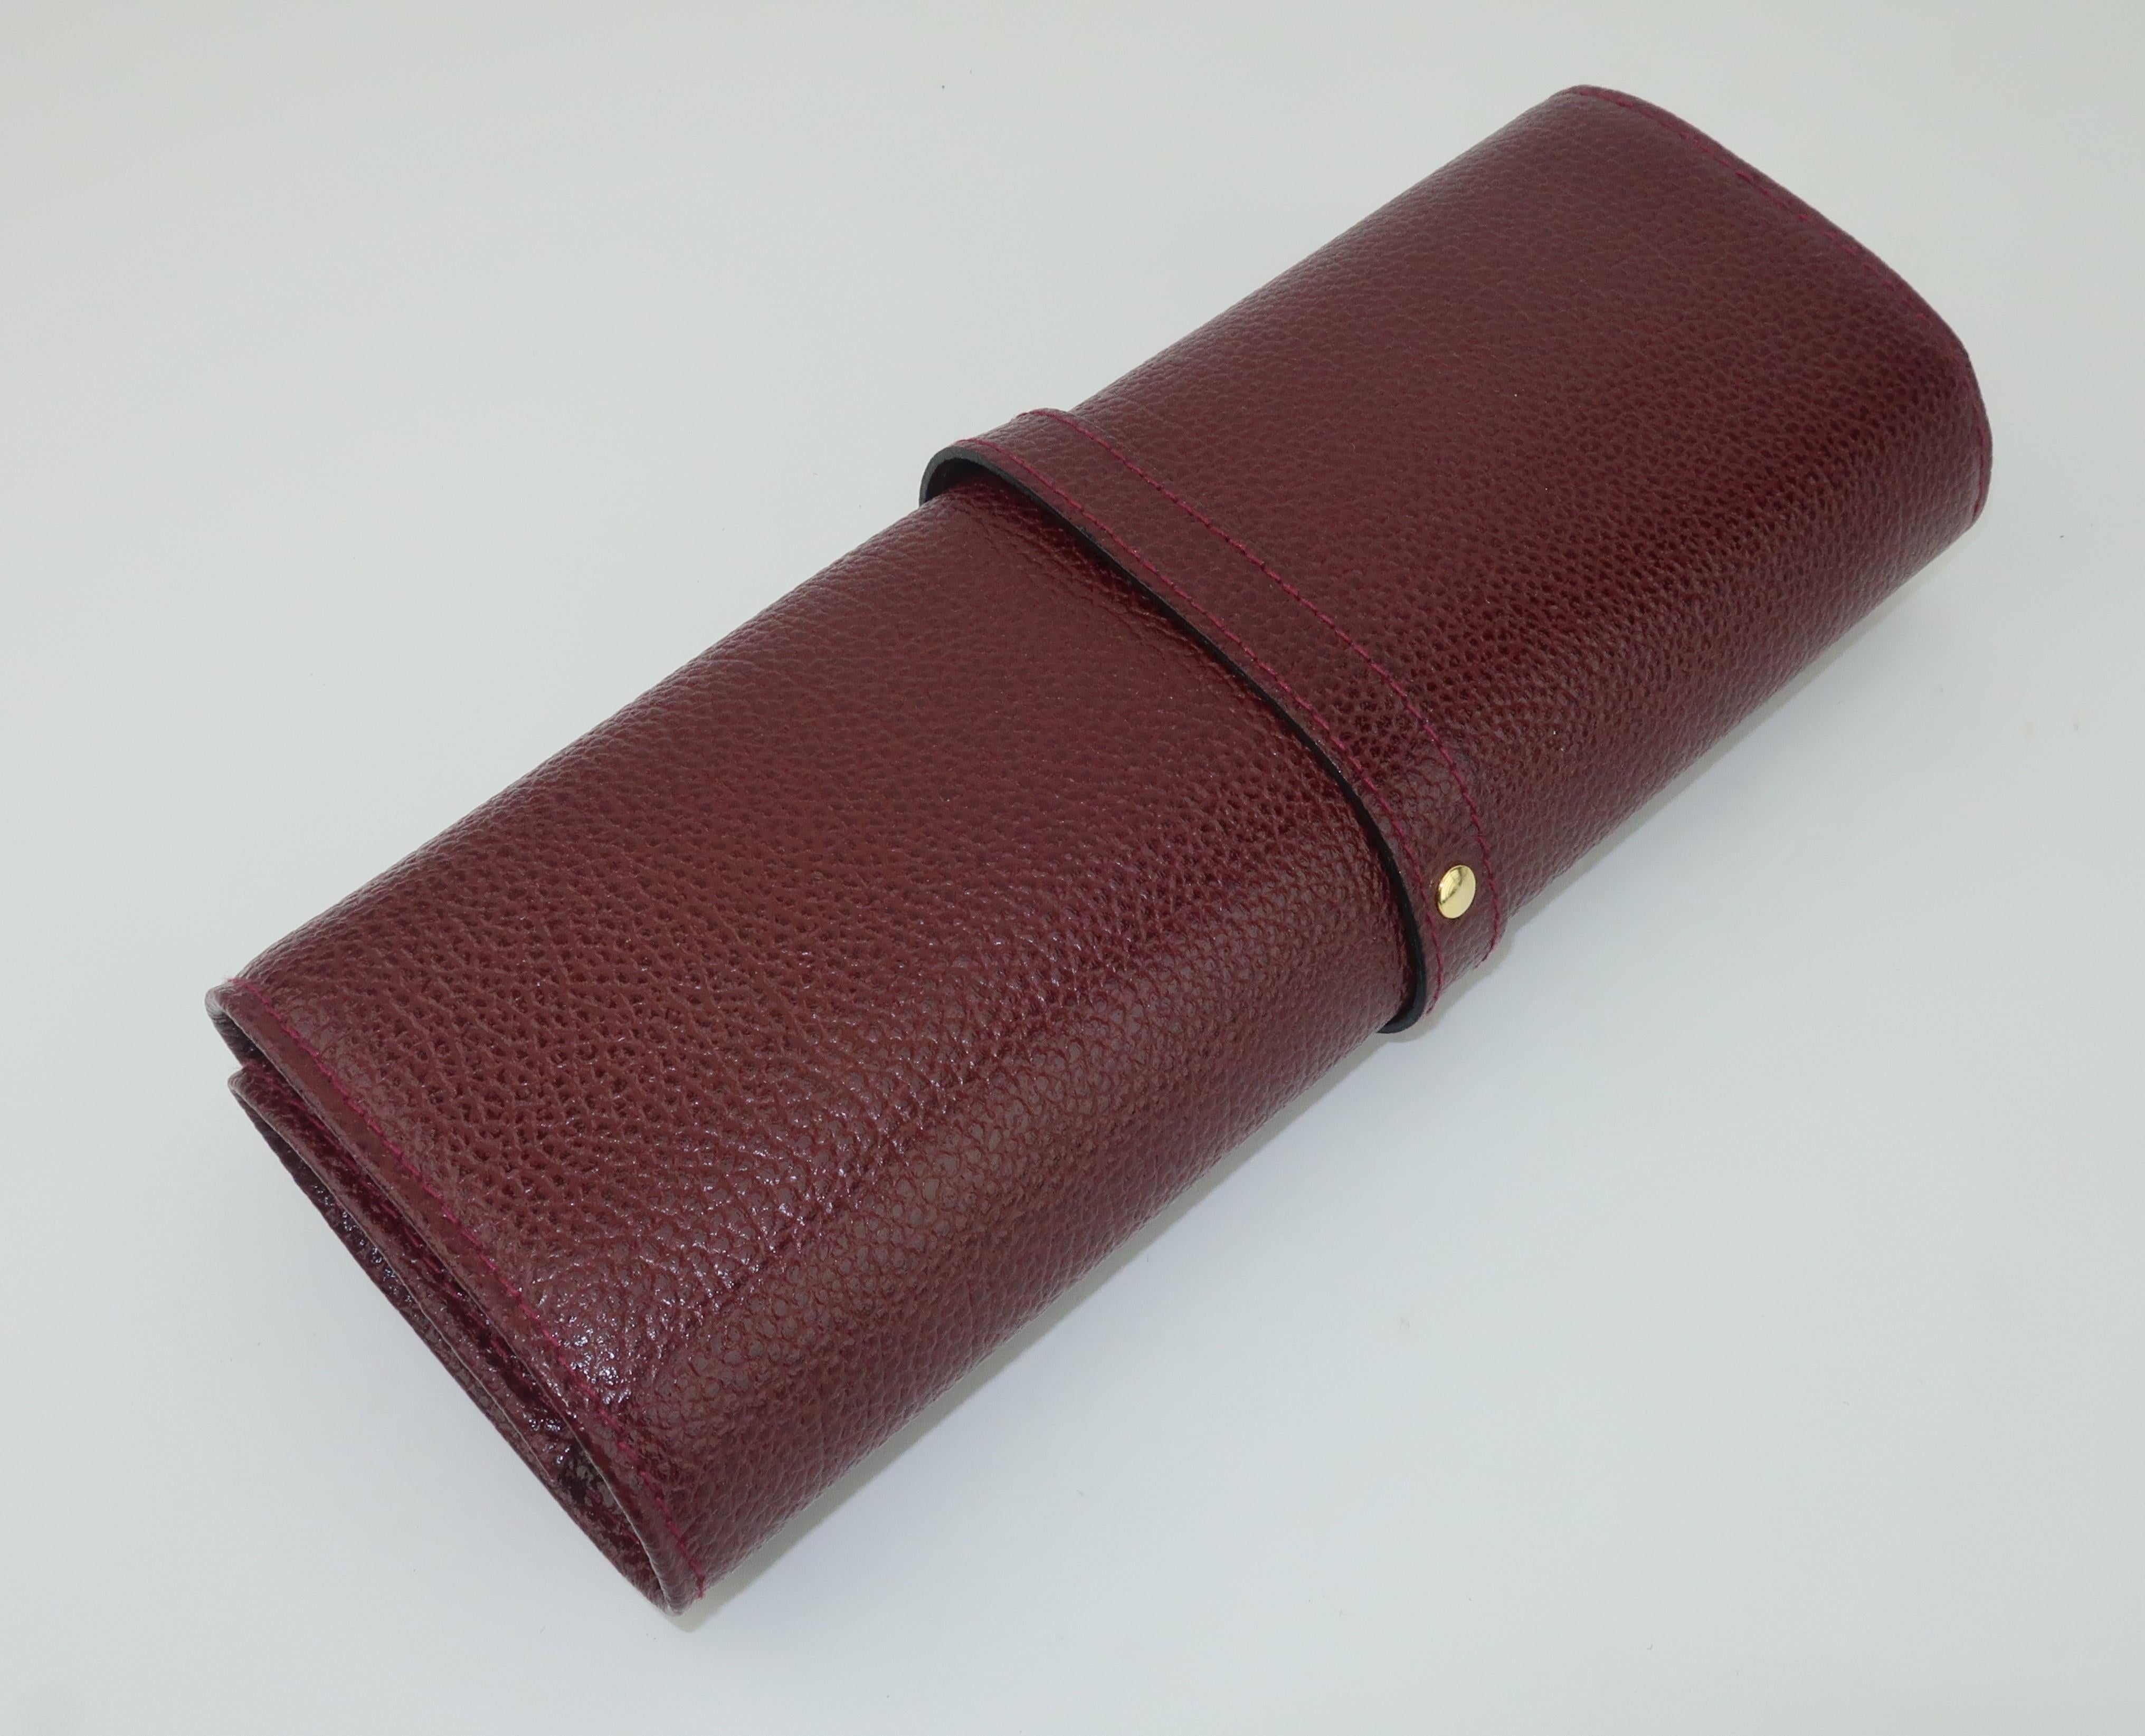 This vintage Italian burgundy pebbled leather case is a classically handsome method of keeping your jewelry safe while traveling or also useful as unobtrusive storage when at home.  The case offers four zippered compartments, a snap strap for rings